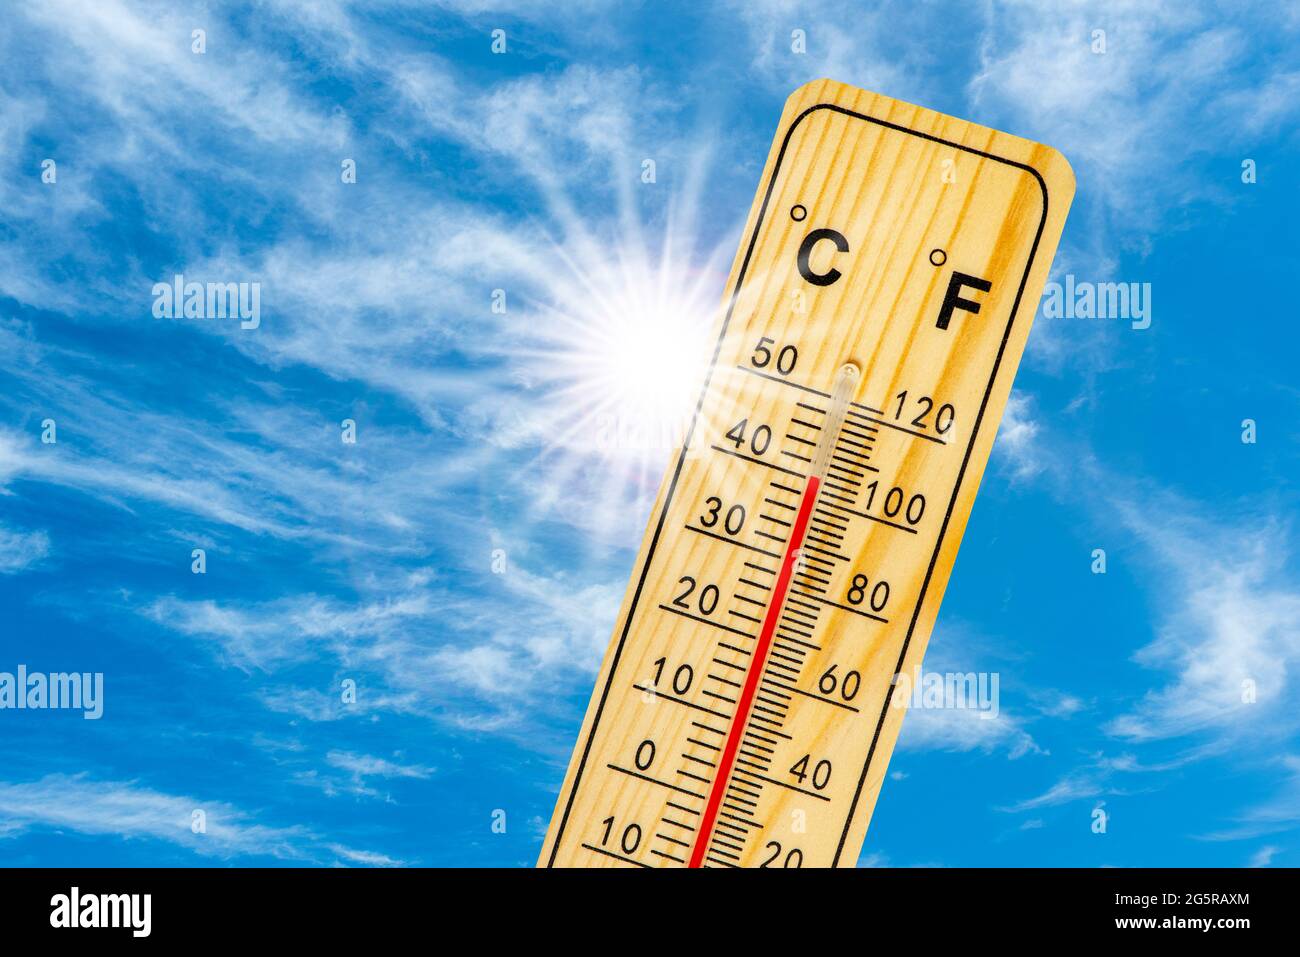 Heat in summer with high temperature and lack of water Stock Photo